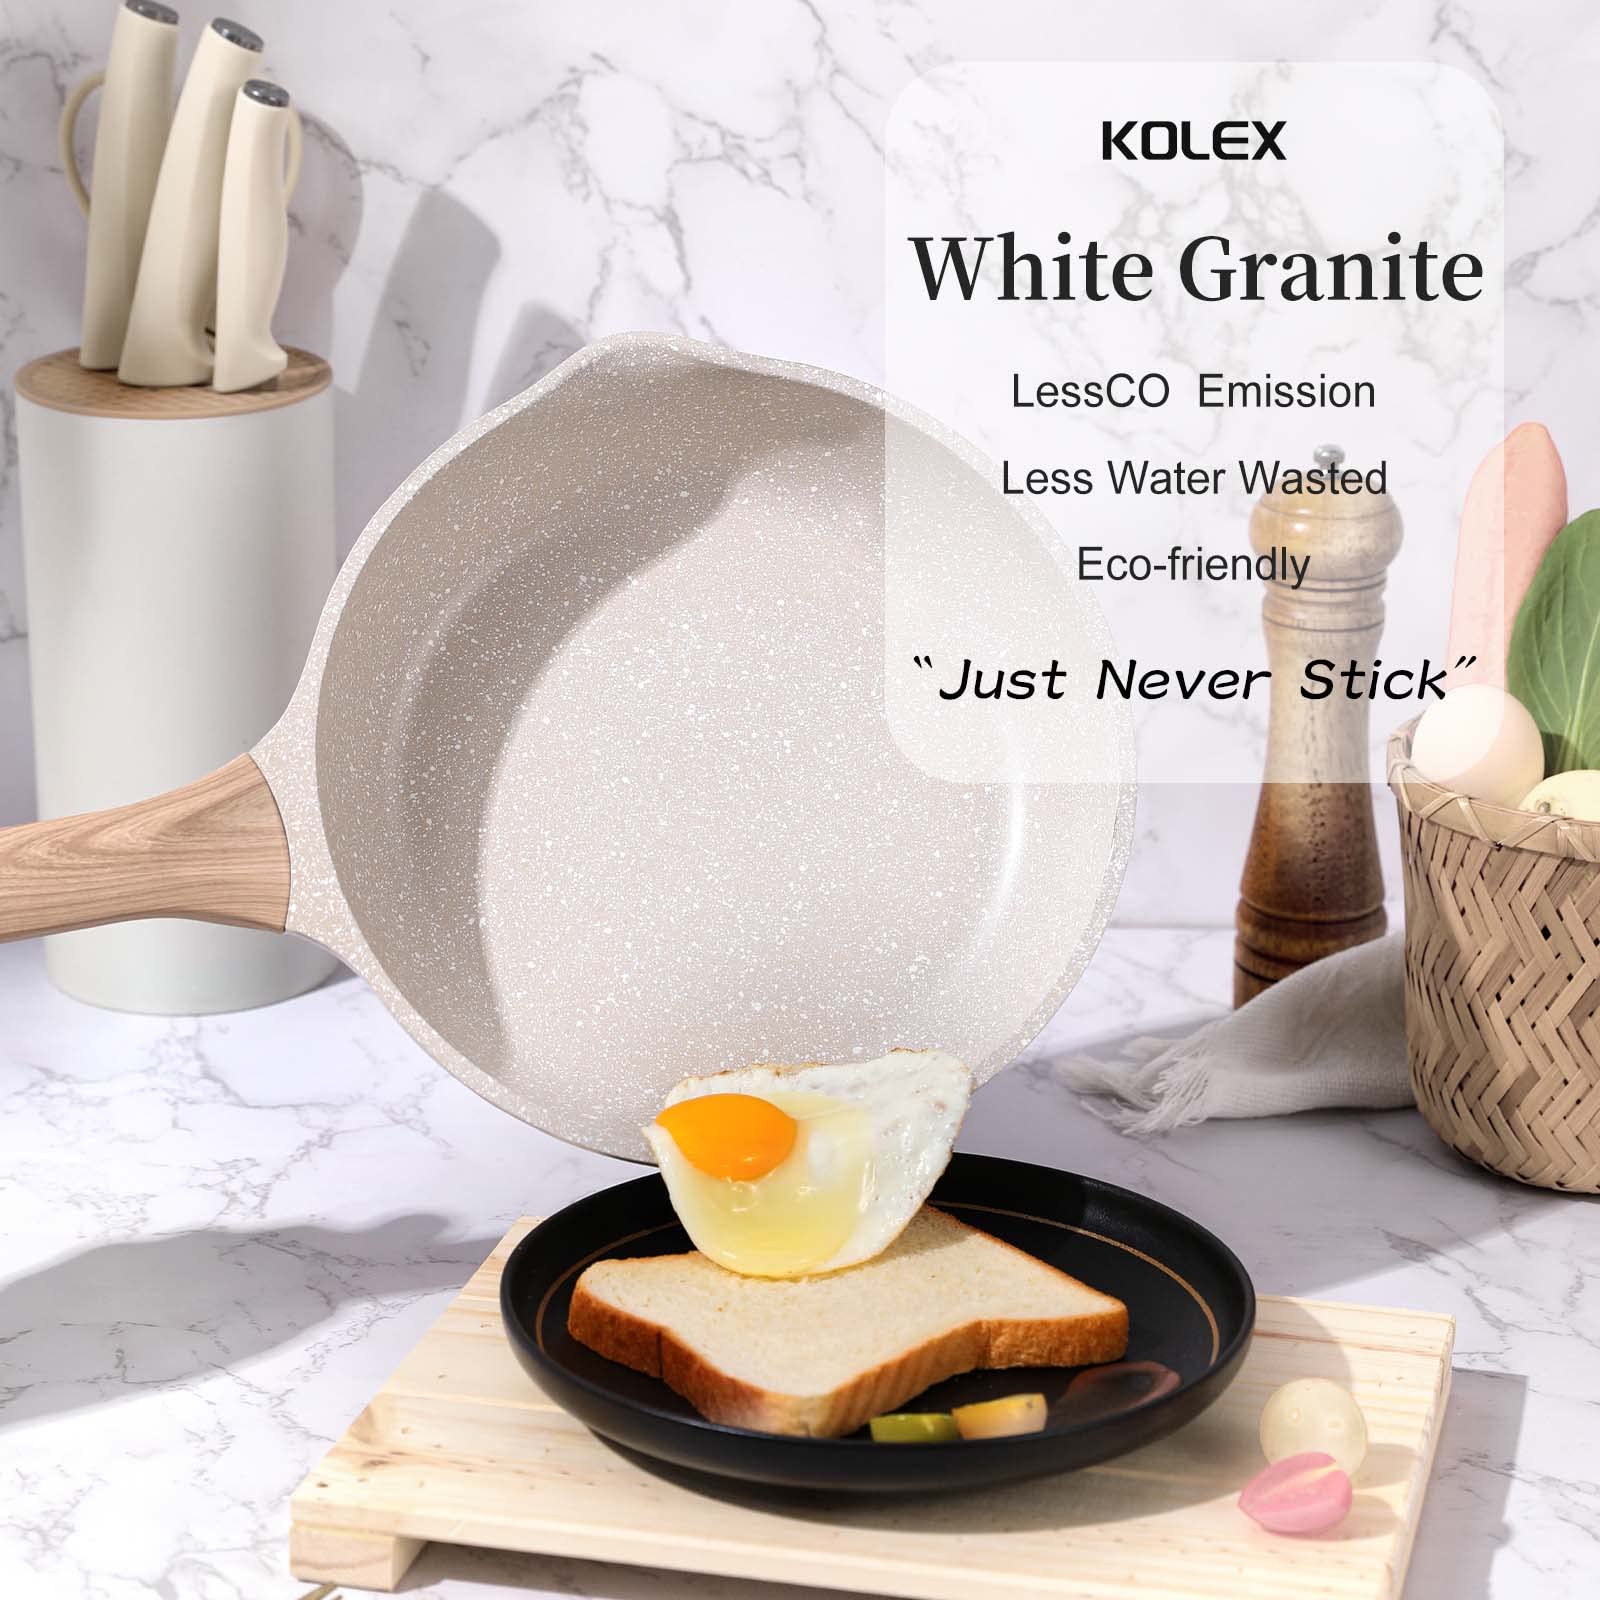 KOLEX Nonstick Frying Pan Skillet, 9.5-Inch Non Stick Granite Egg Pan Omelet Pans, Healthy Stone Cookware Chef's Pan, PFOA Free, Induction Compatible (White Granite, 9.5-Inch)